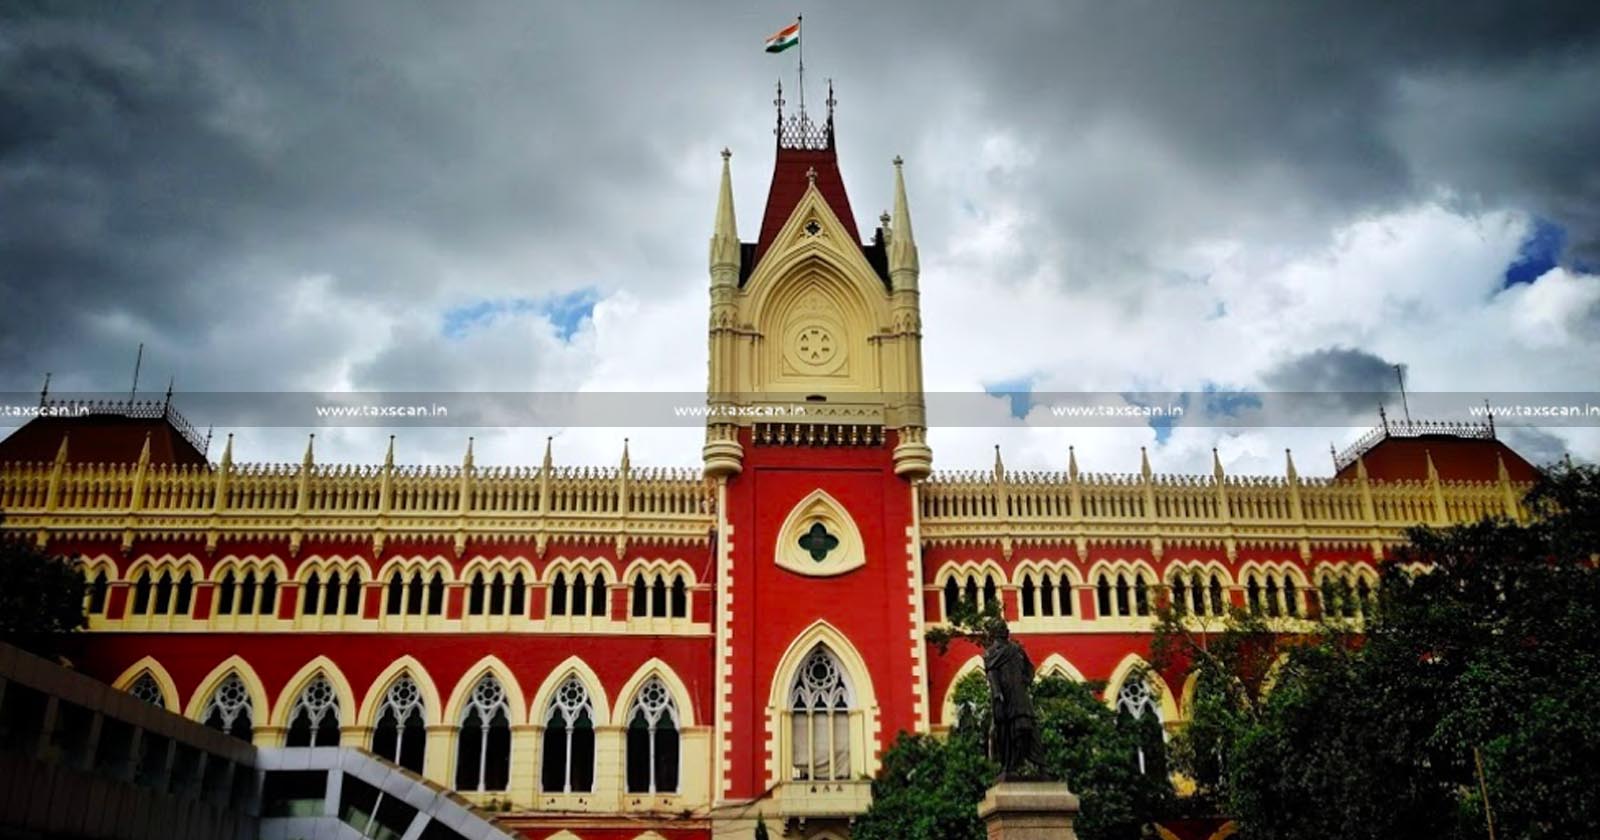 AAR rejects Application on Ground of Lack of Locus Standi: Calcutta HC directs to Reconsider Application